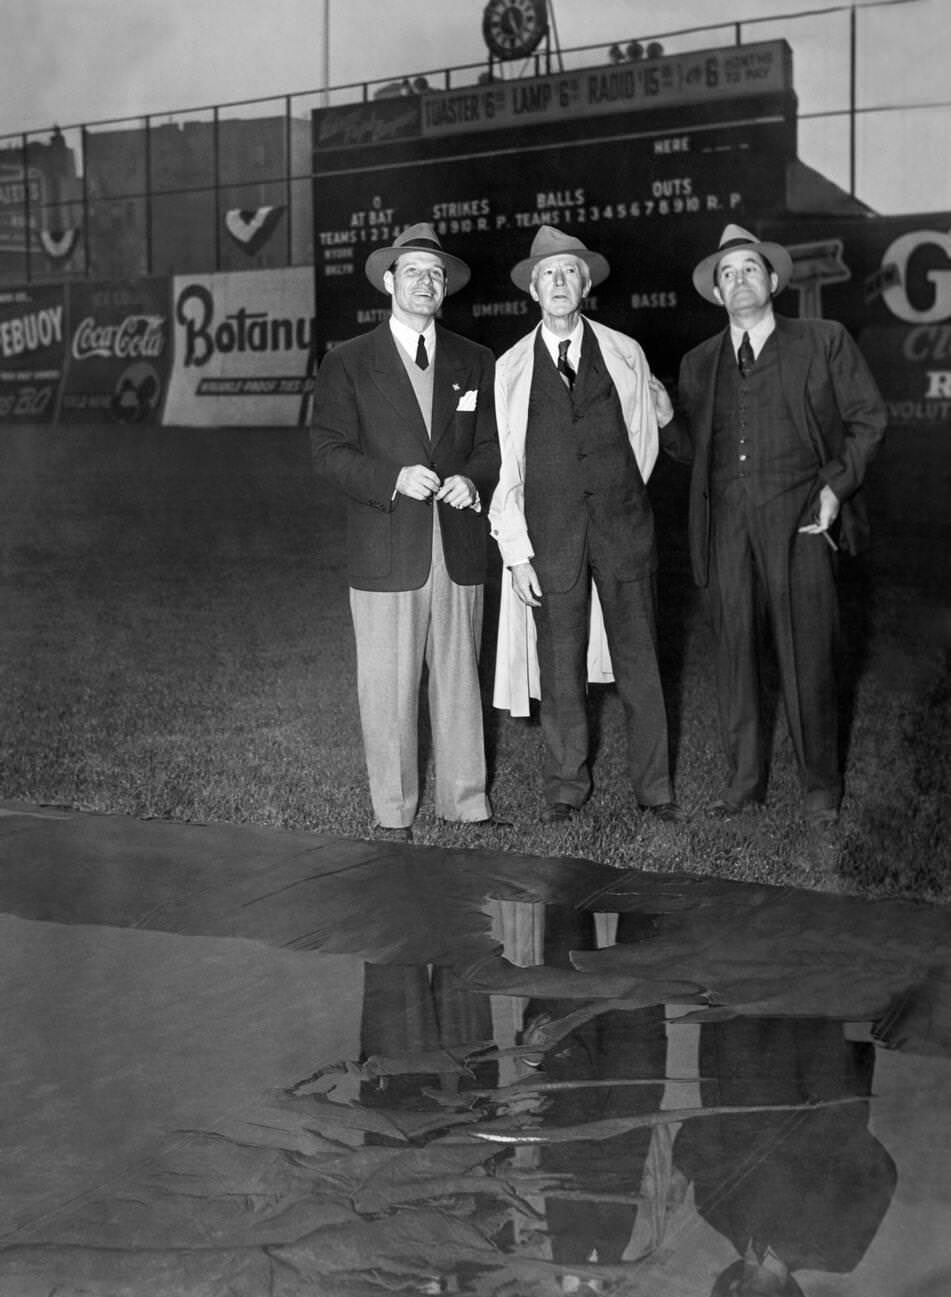 Managers And Commissioner At Ebbets Field, Brooklyn, 1941